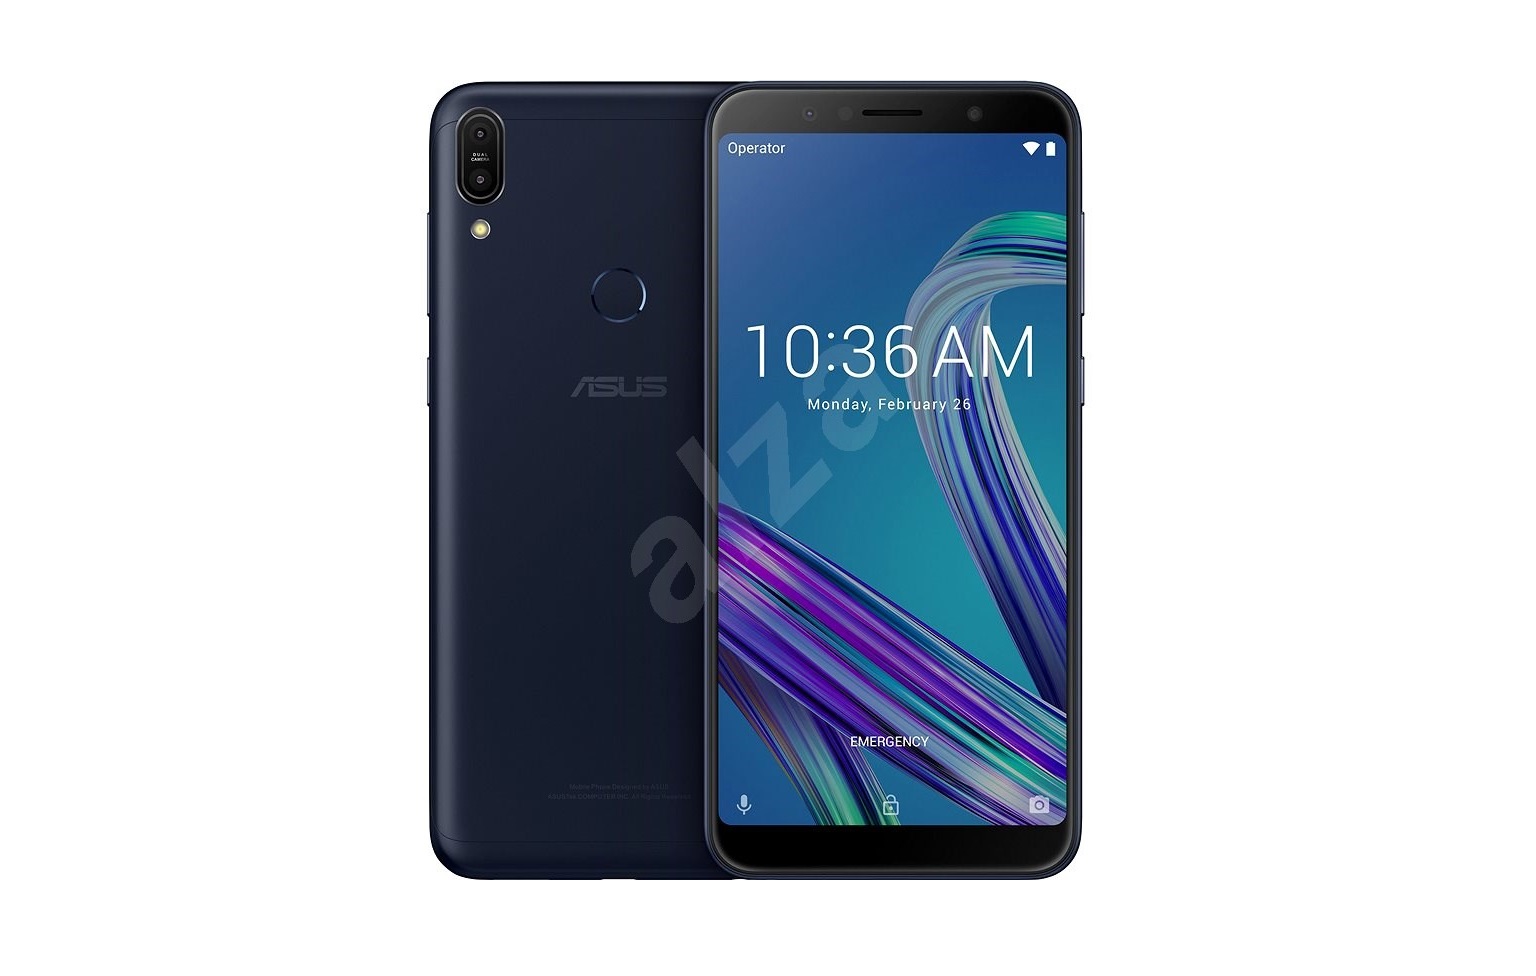 How to Root Asus Zenfone Max Pro with Magisk without TWRP